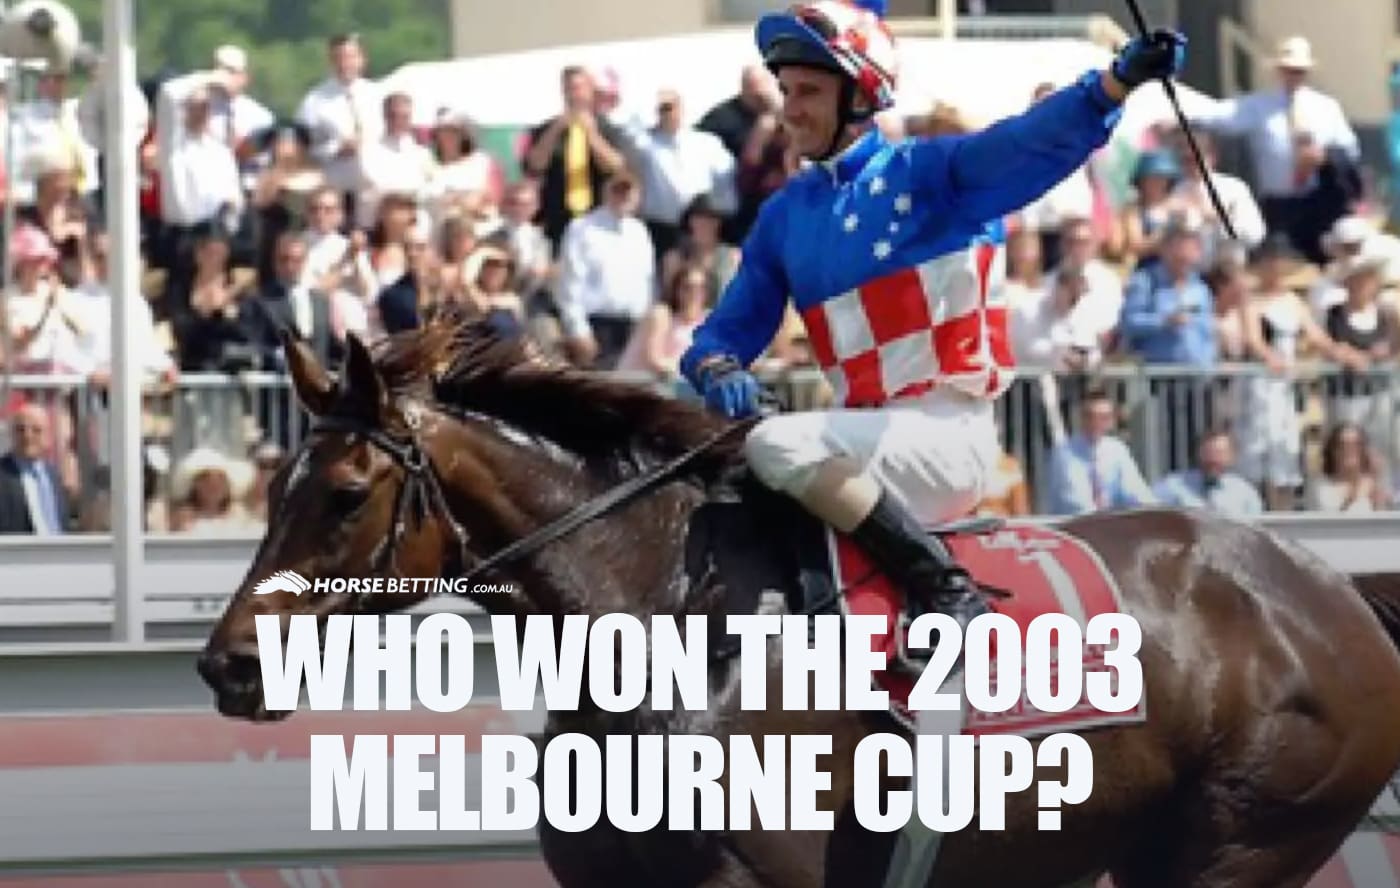 Who won the 2003 Melbourne Cup?